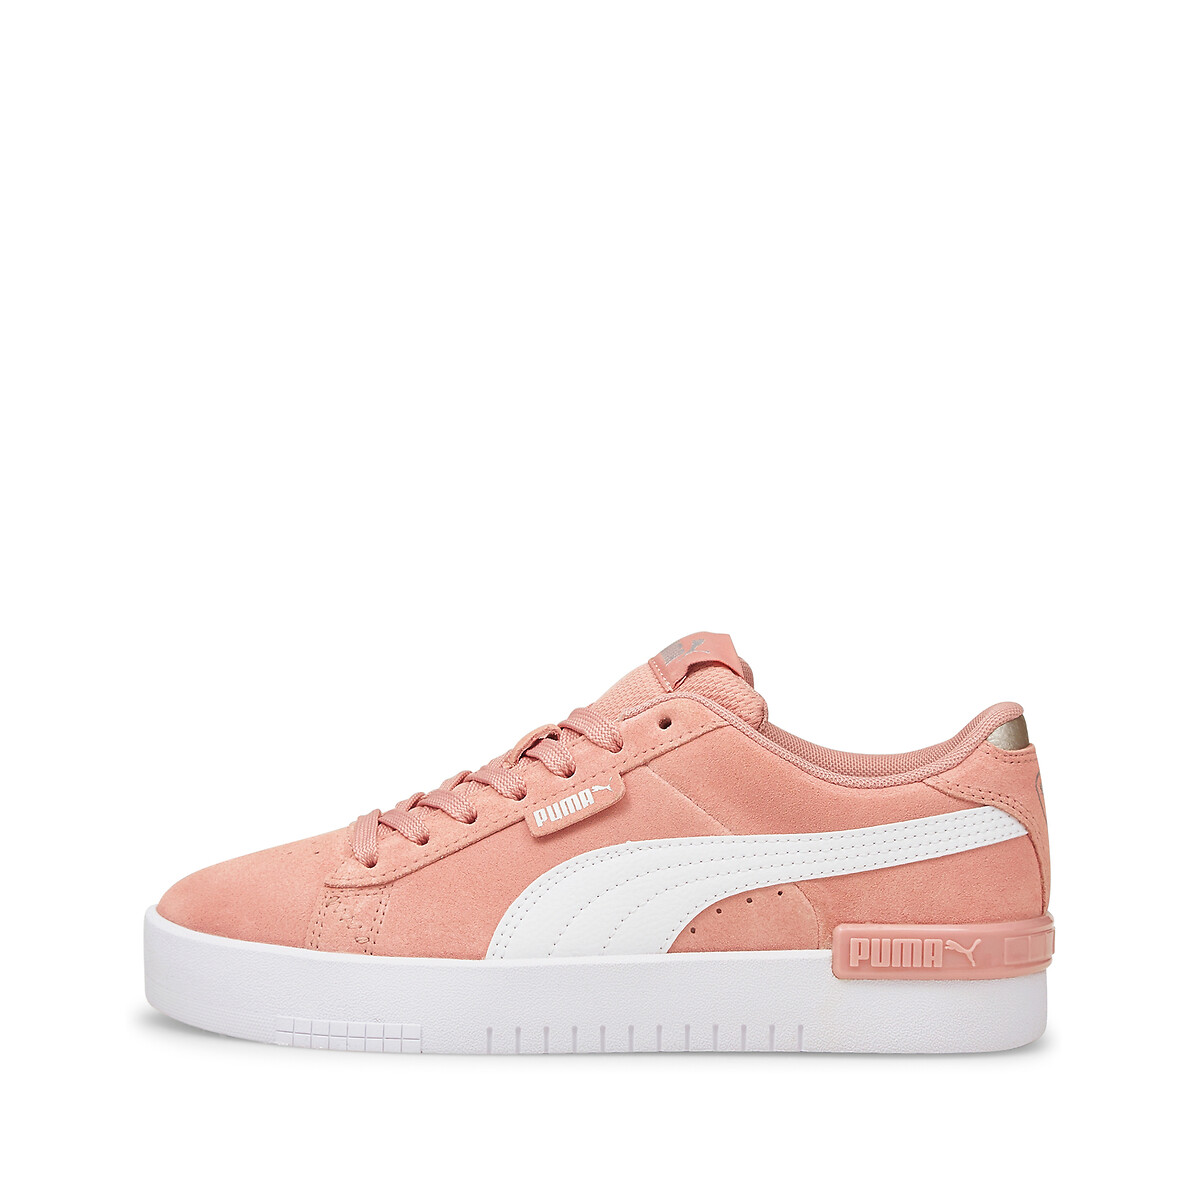 puma trainers pink and white